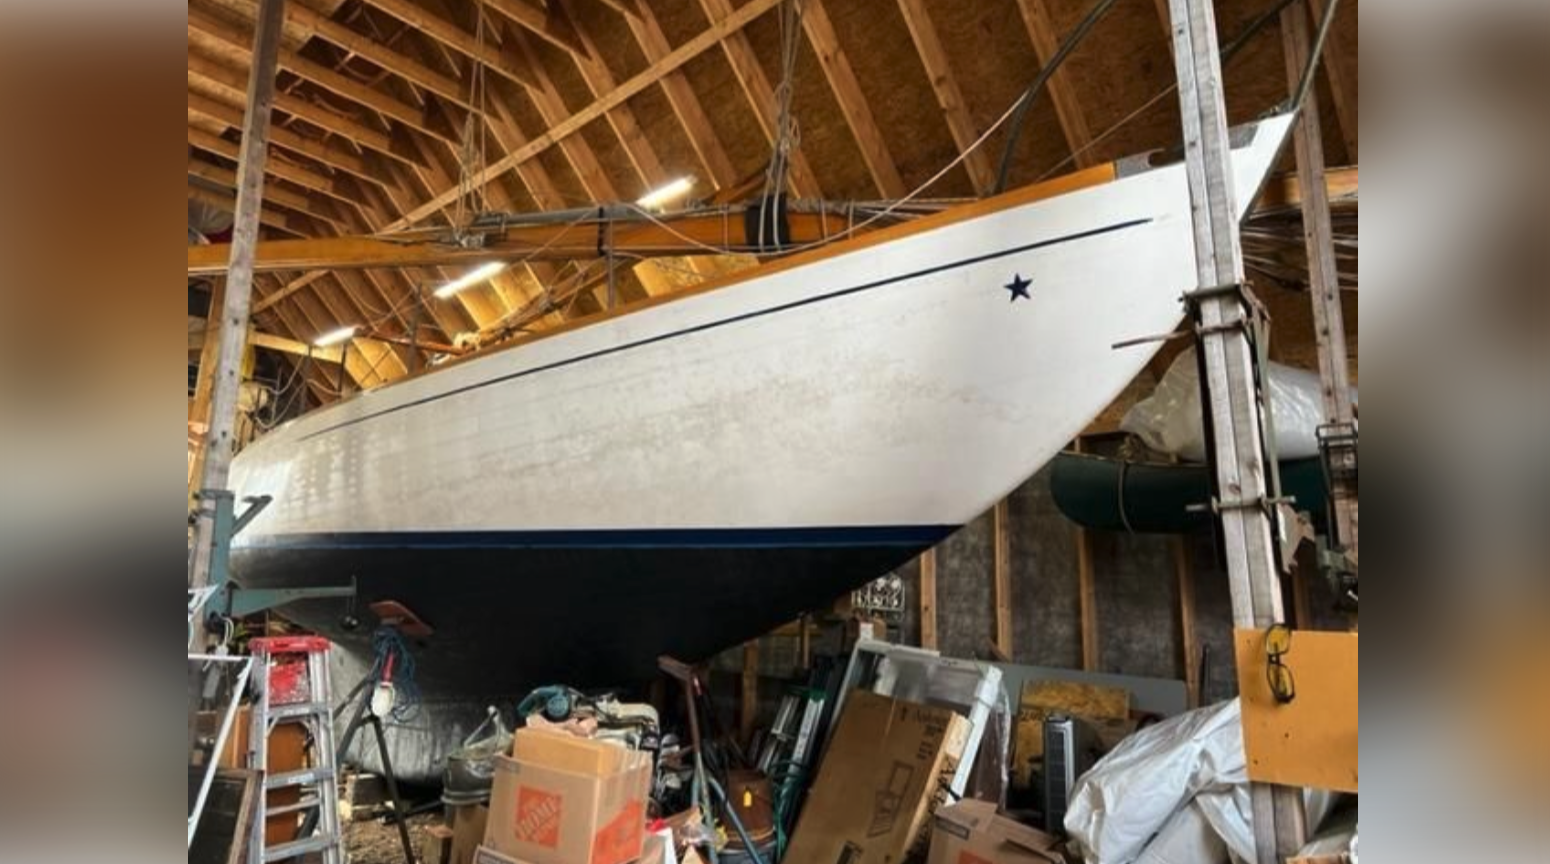 1956 Concordia 39 WASABI. Asking $10,500. (Gray & Gray brokerage and/or Block Island Maritime Funding. Yacht is in Yarmouth, ME.) More information: